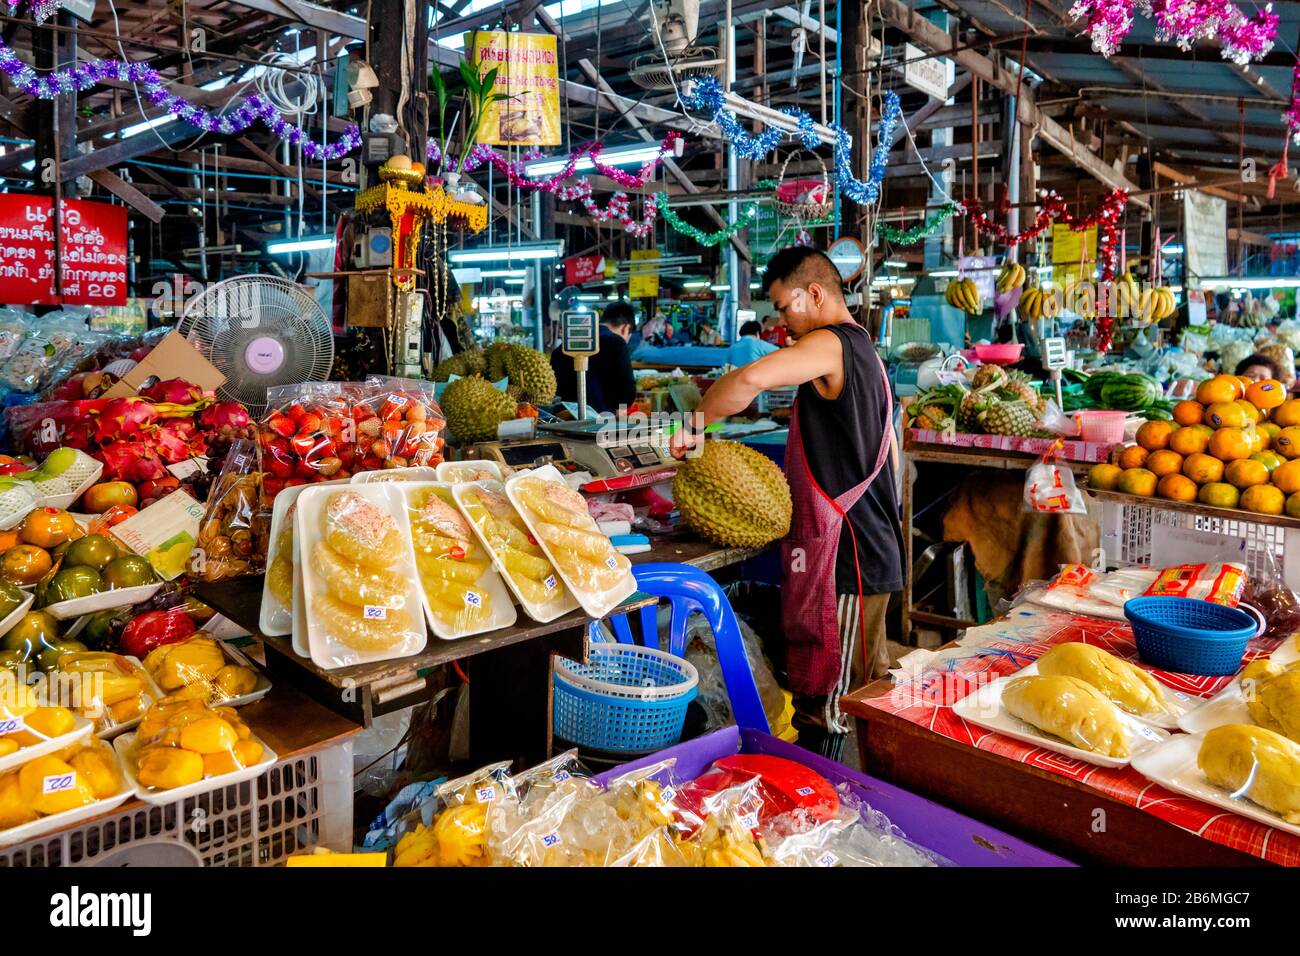 Fruit stall in the Somphet Market, Chiang Mai, Thailand Stock Photo